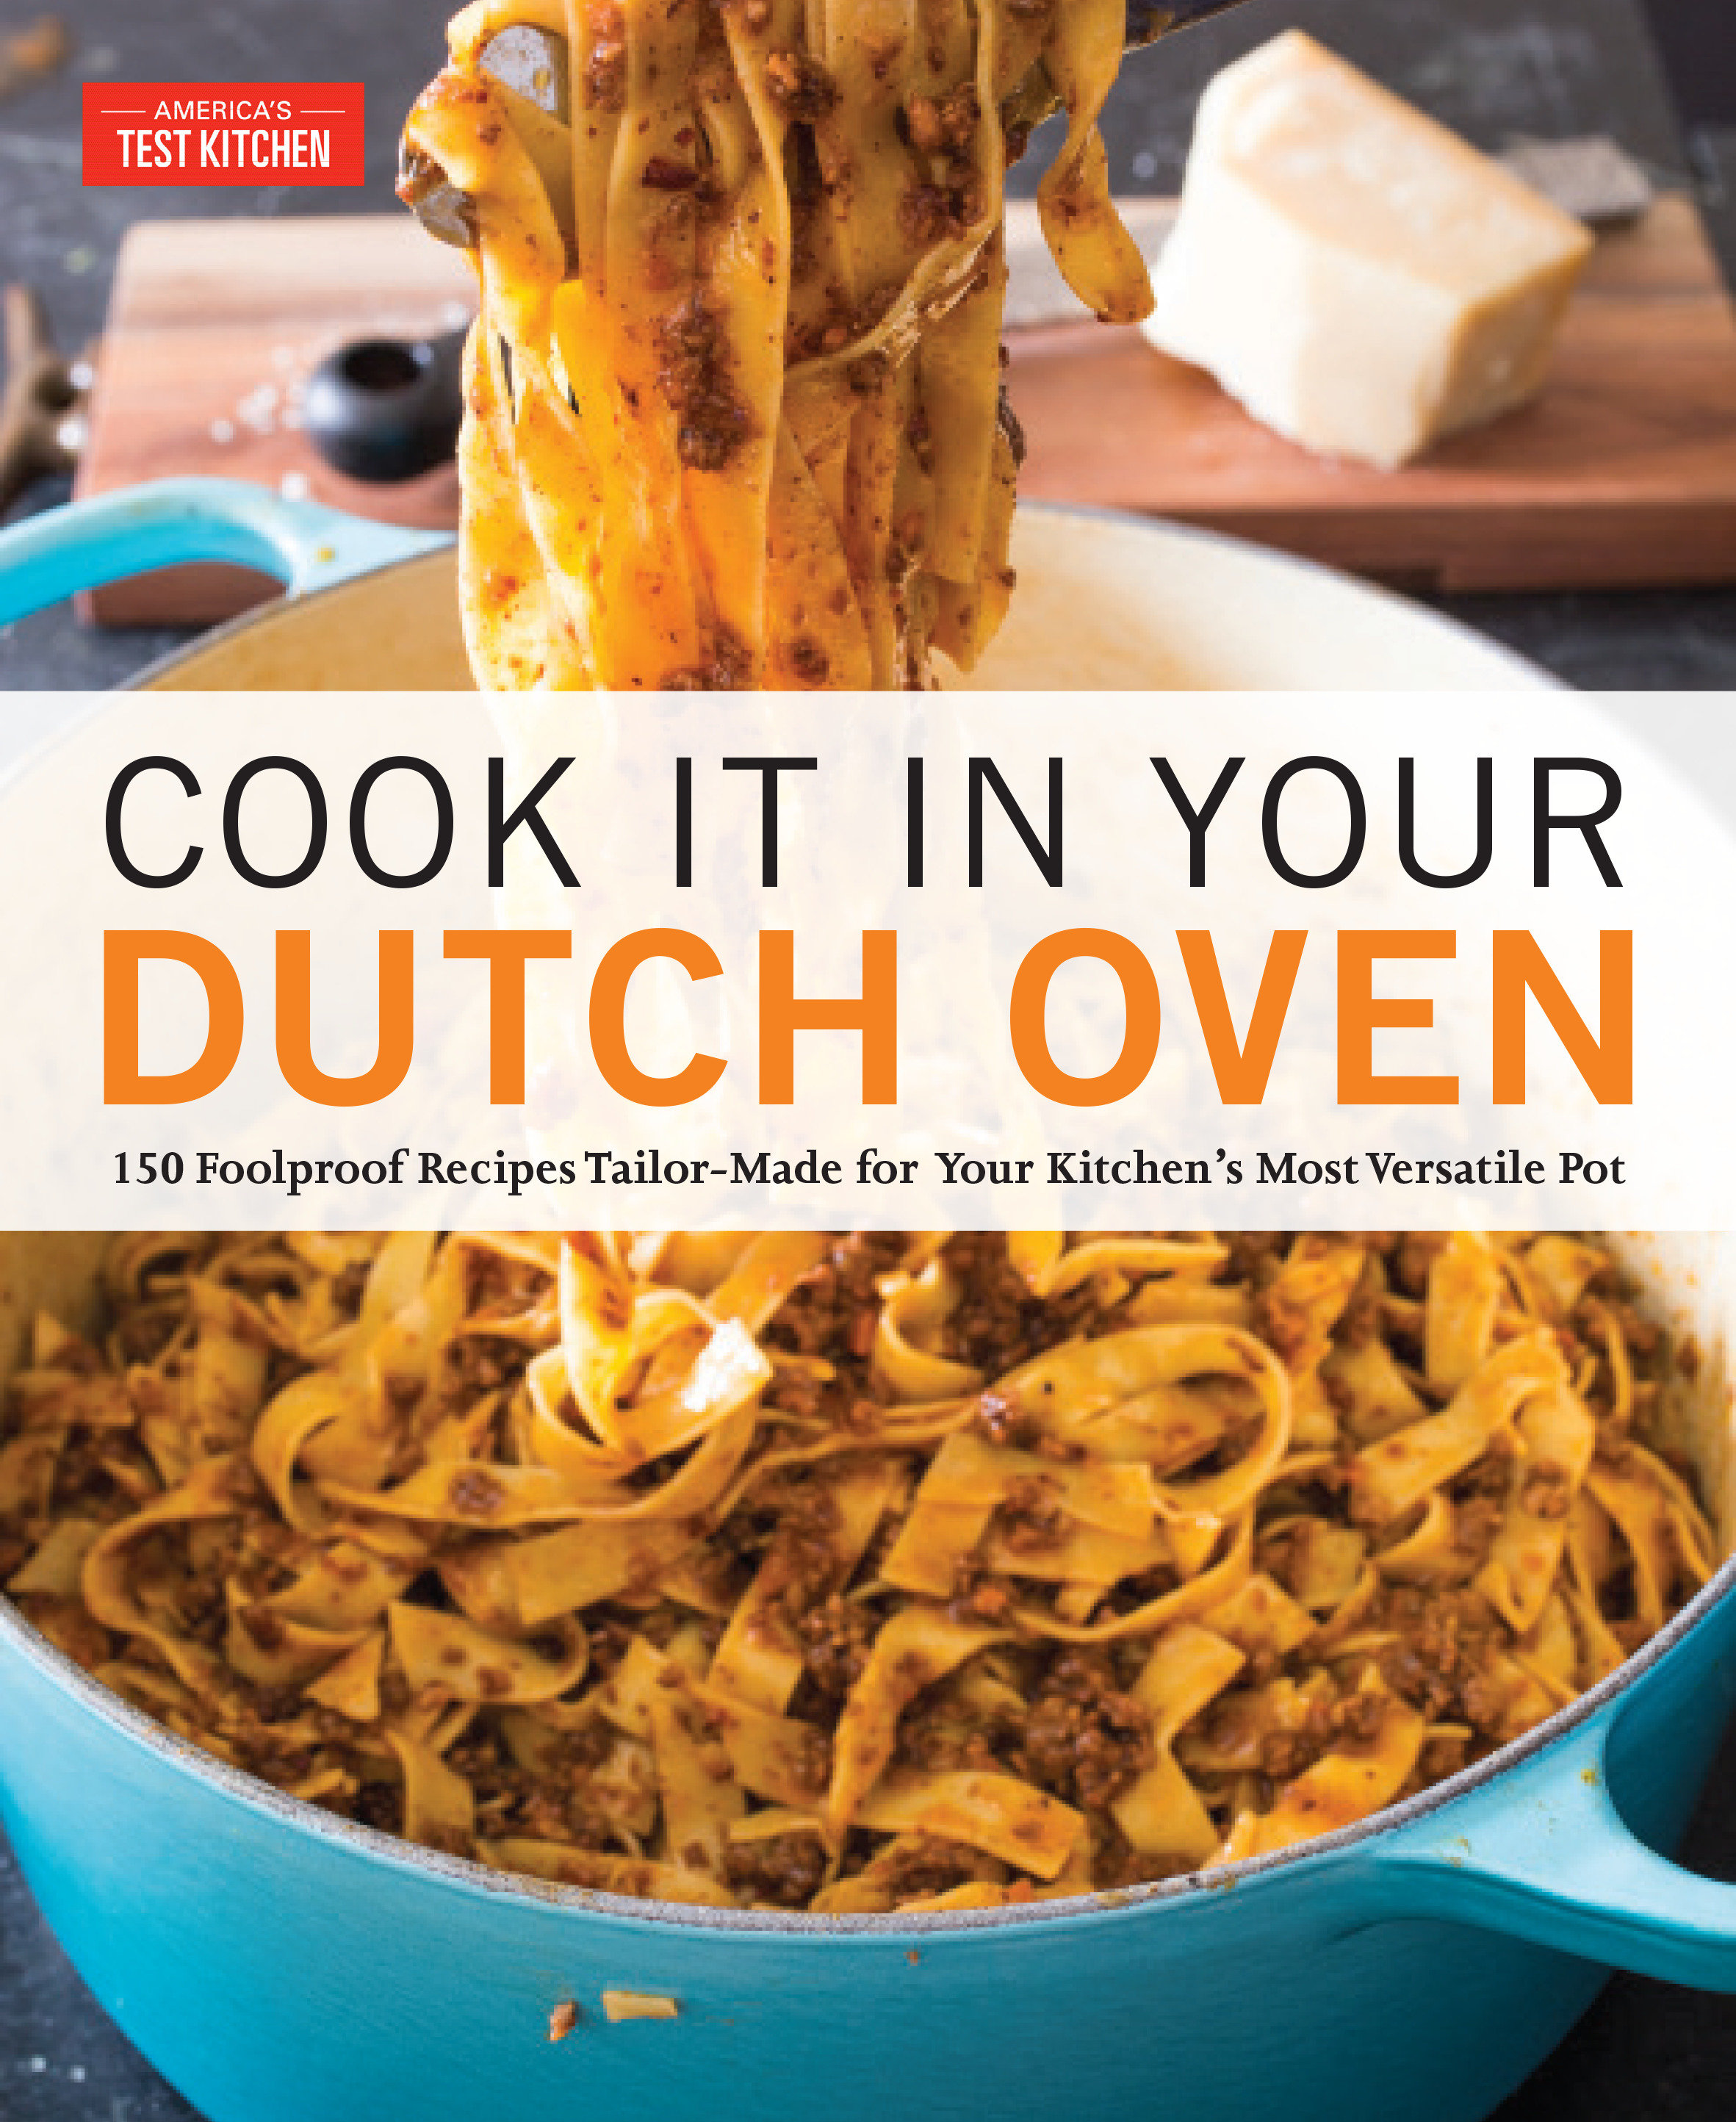 Cook it in your Dutch oven 150 foolproof recipes tailor-made for your kitchen's most versatile pot cover image